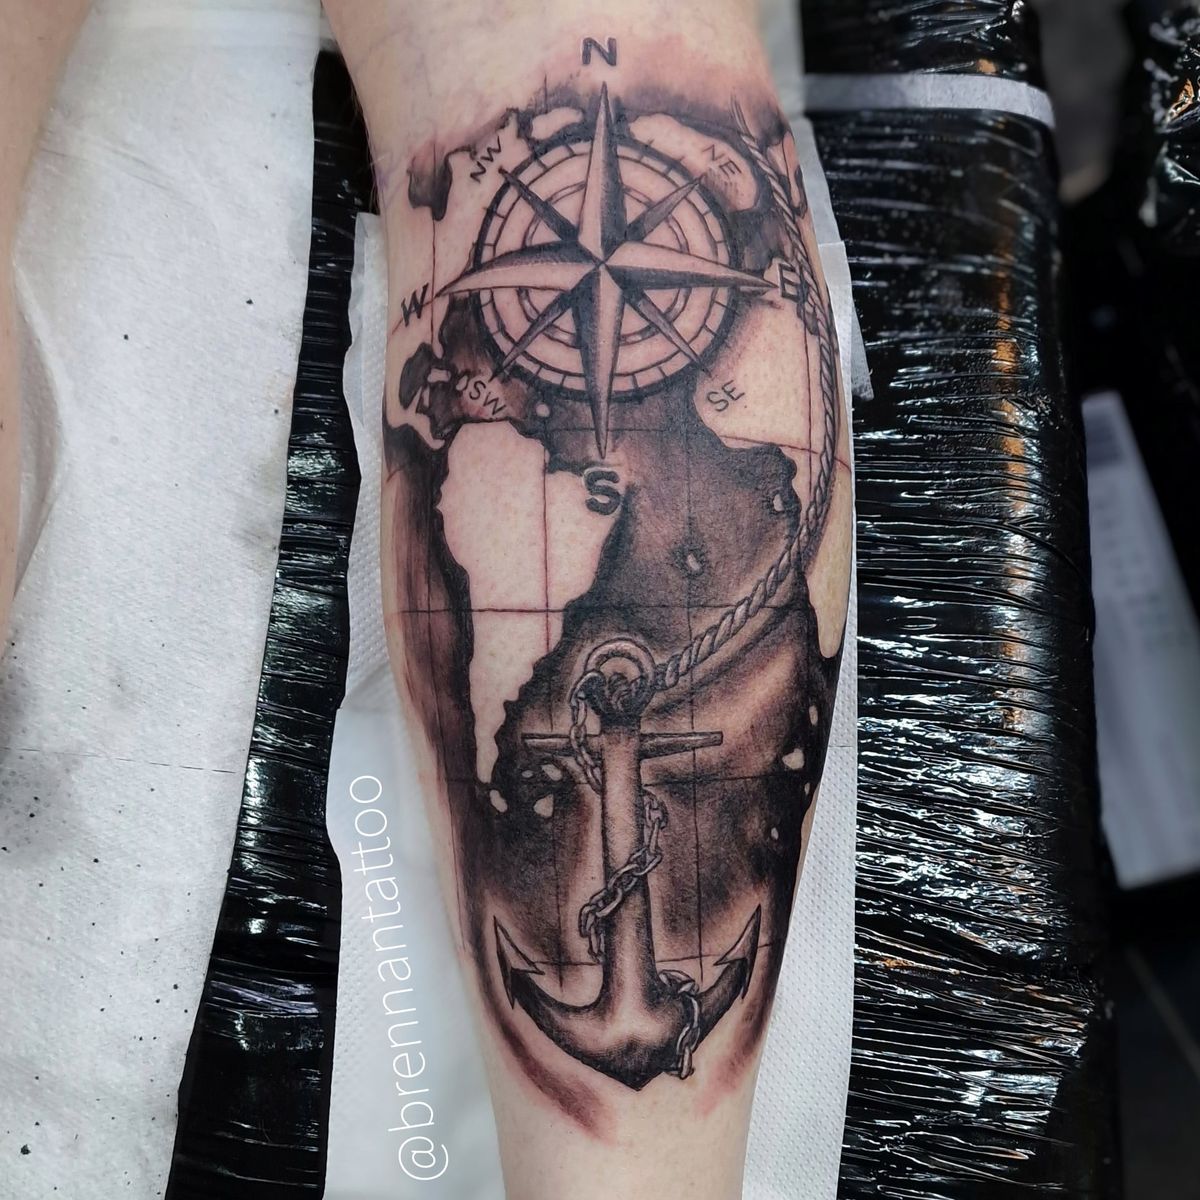 Tattoo uploaded by Brennantattoo • Compass and anchor old school black ...